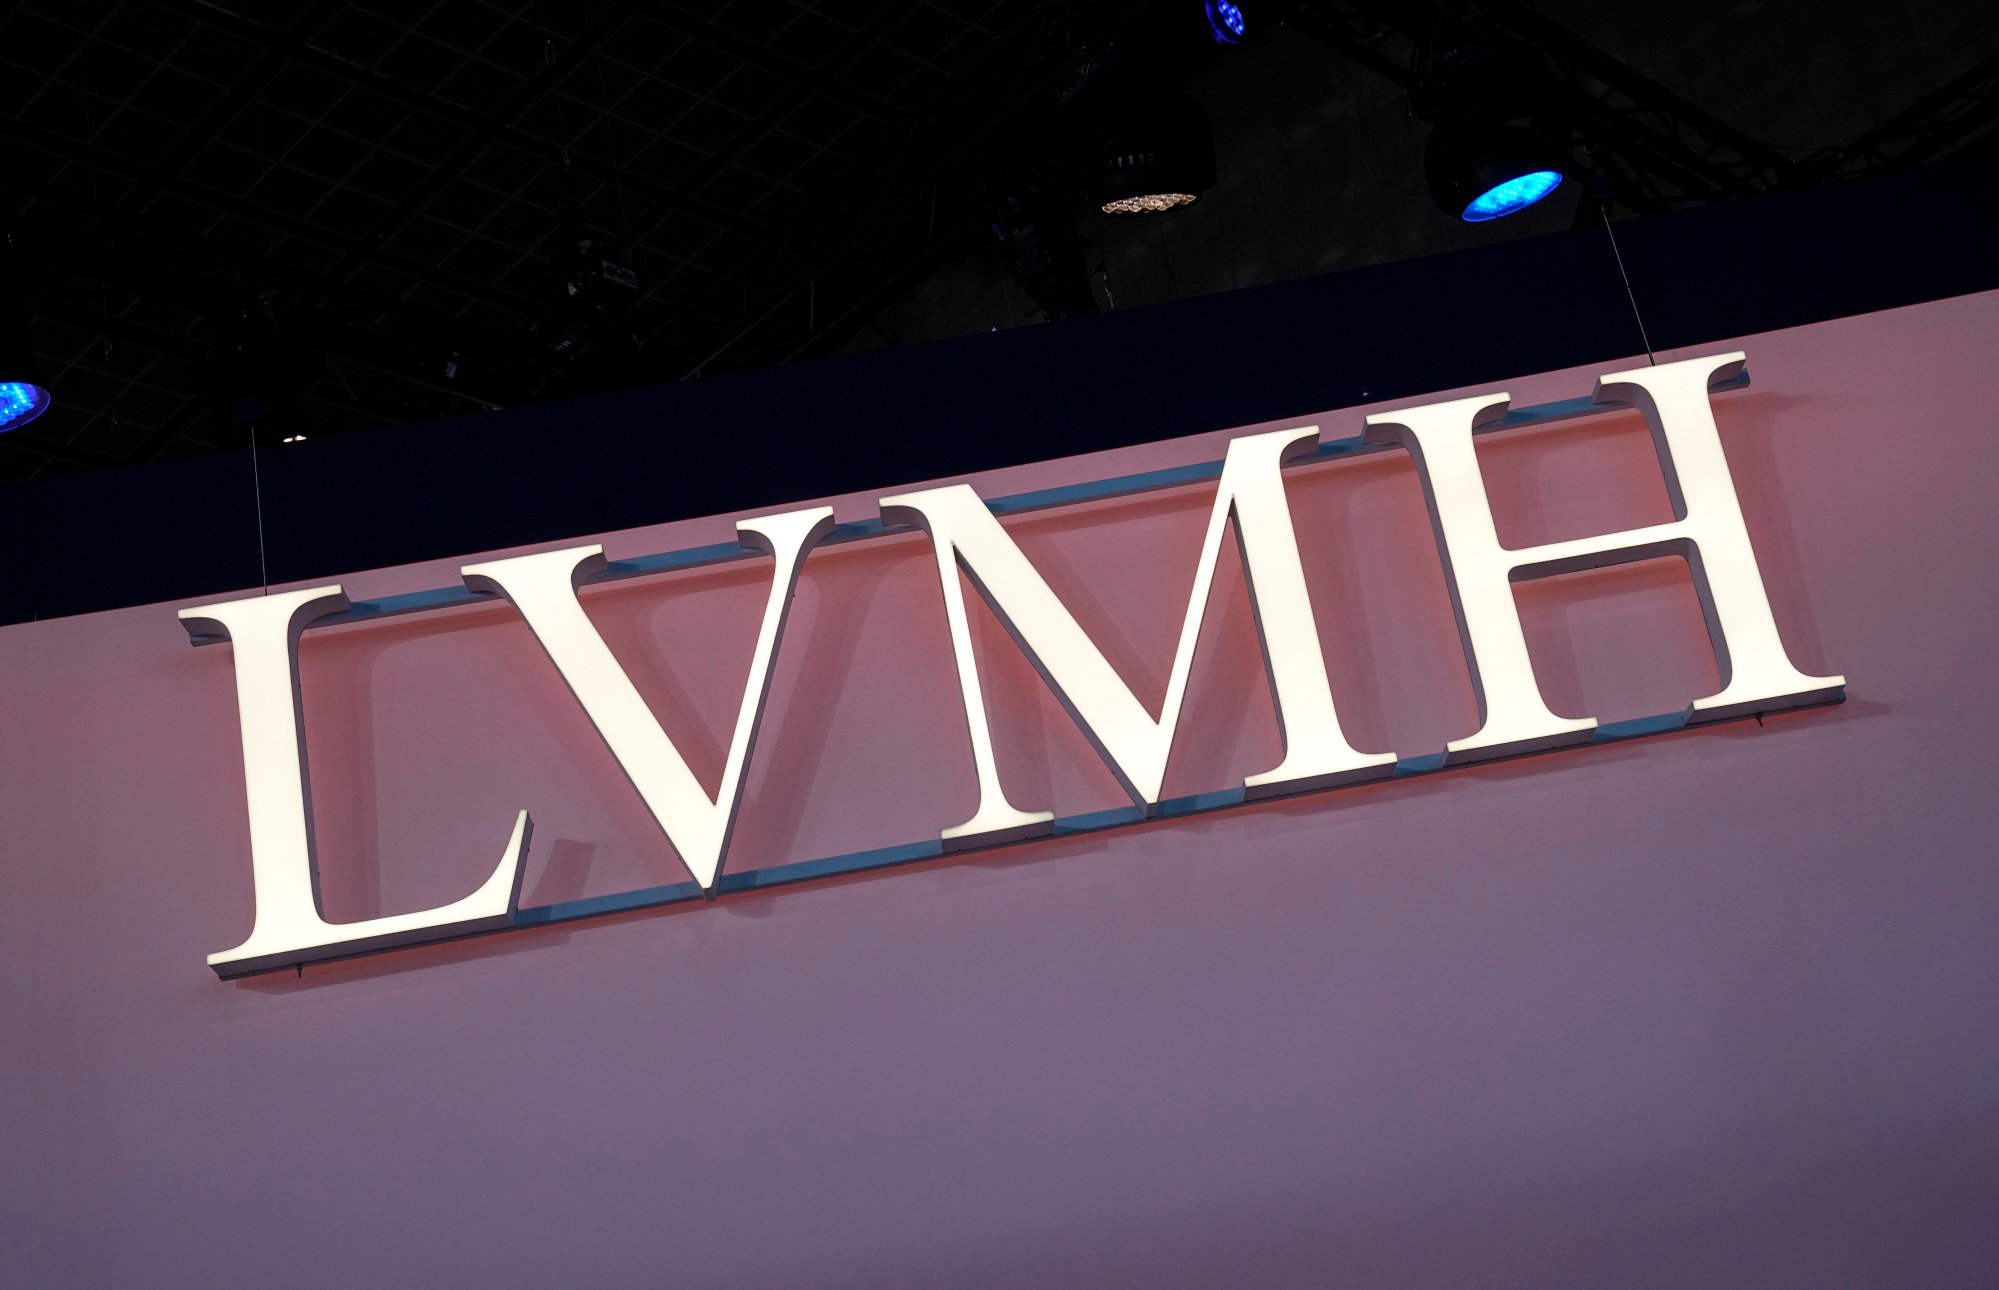 LVMH in talks with Paris 2024 Organising Committee to become premium sponsor